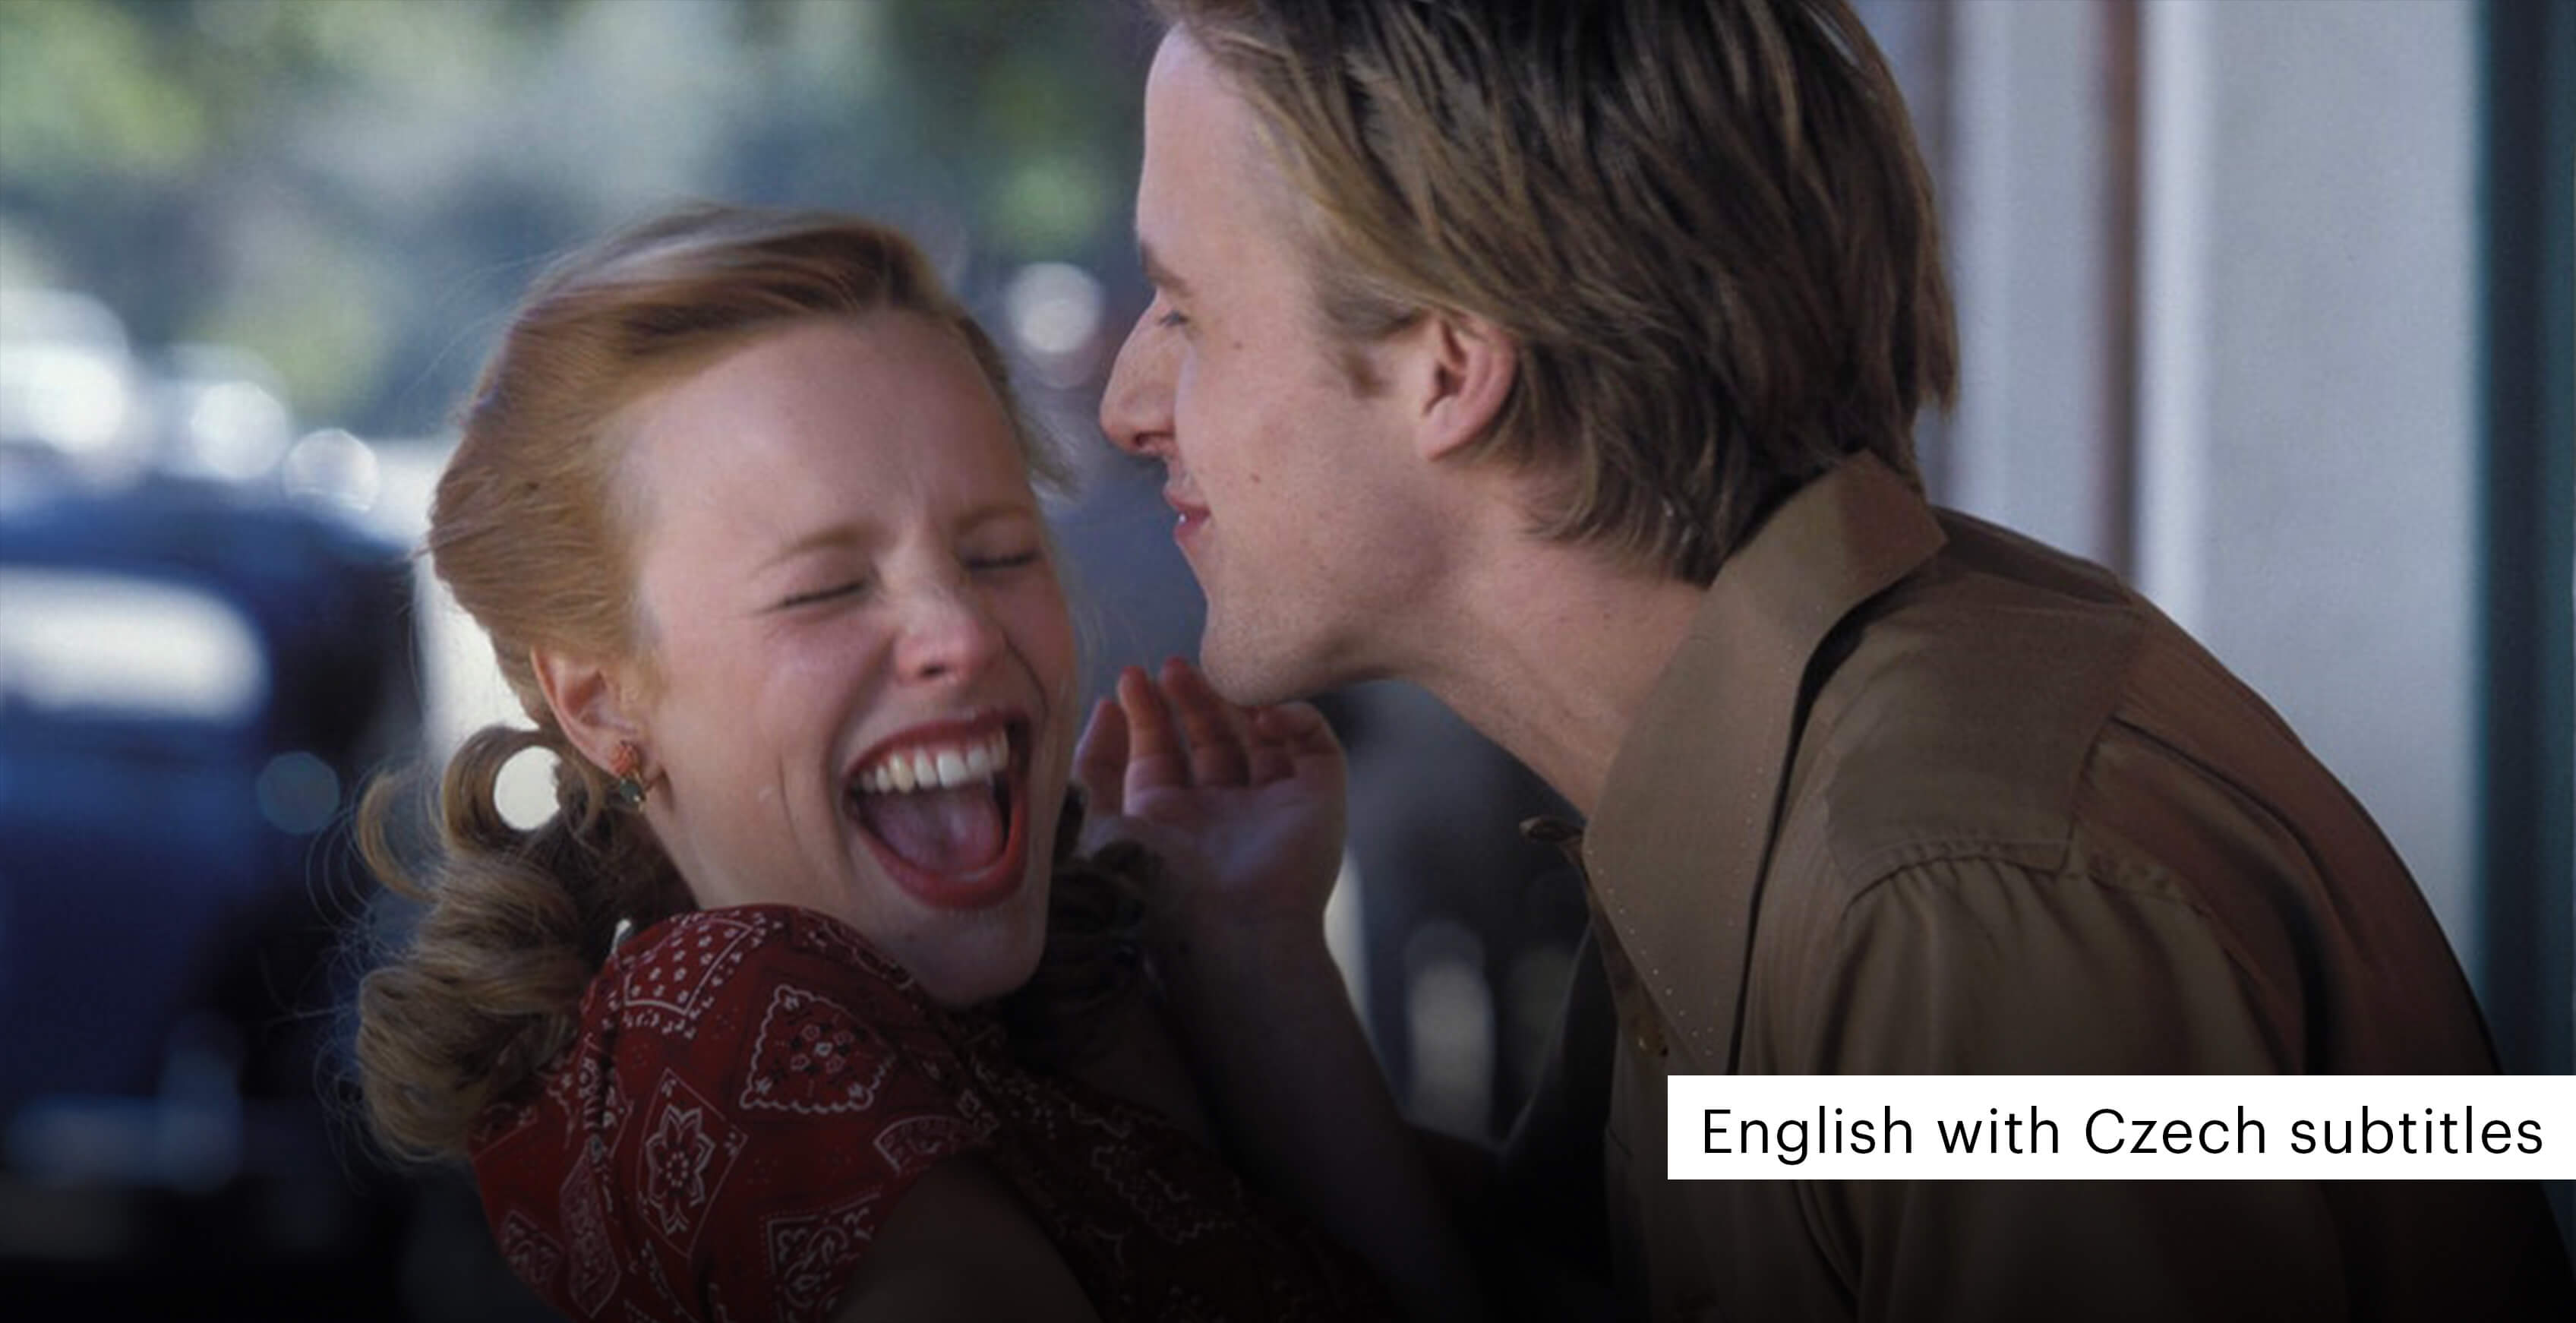 Silent EAT IN Kino! The Notebook, 22/02